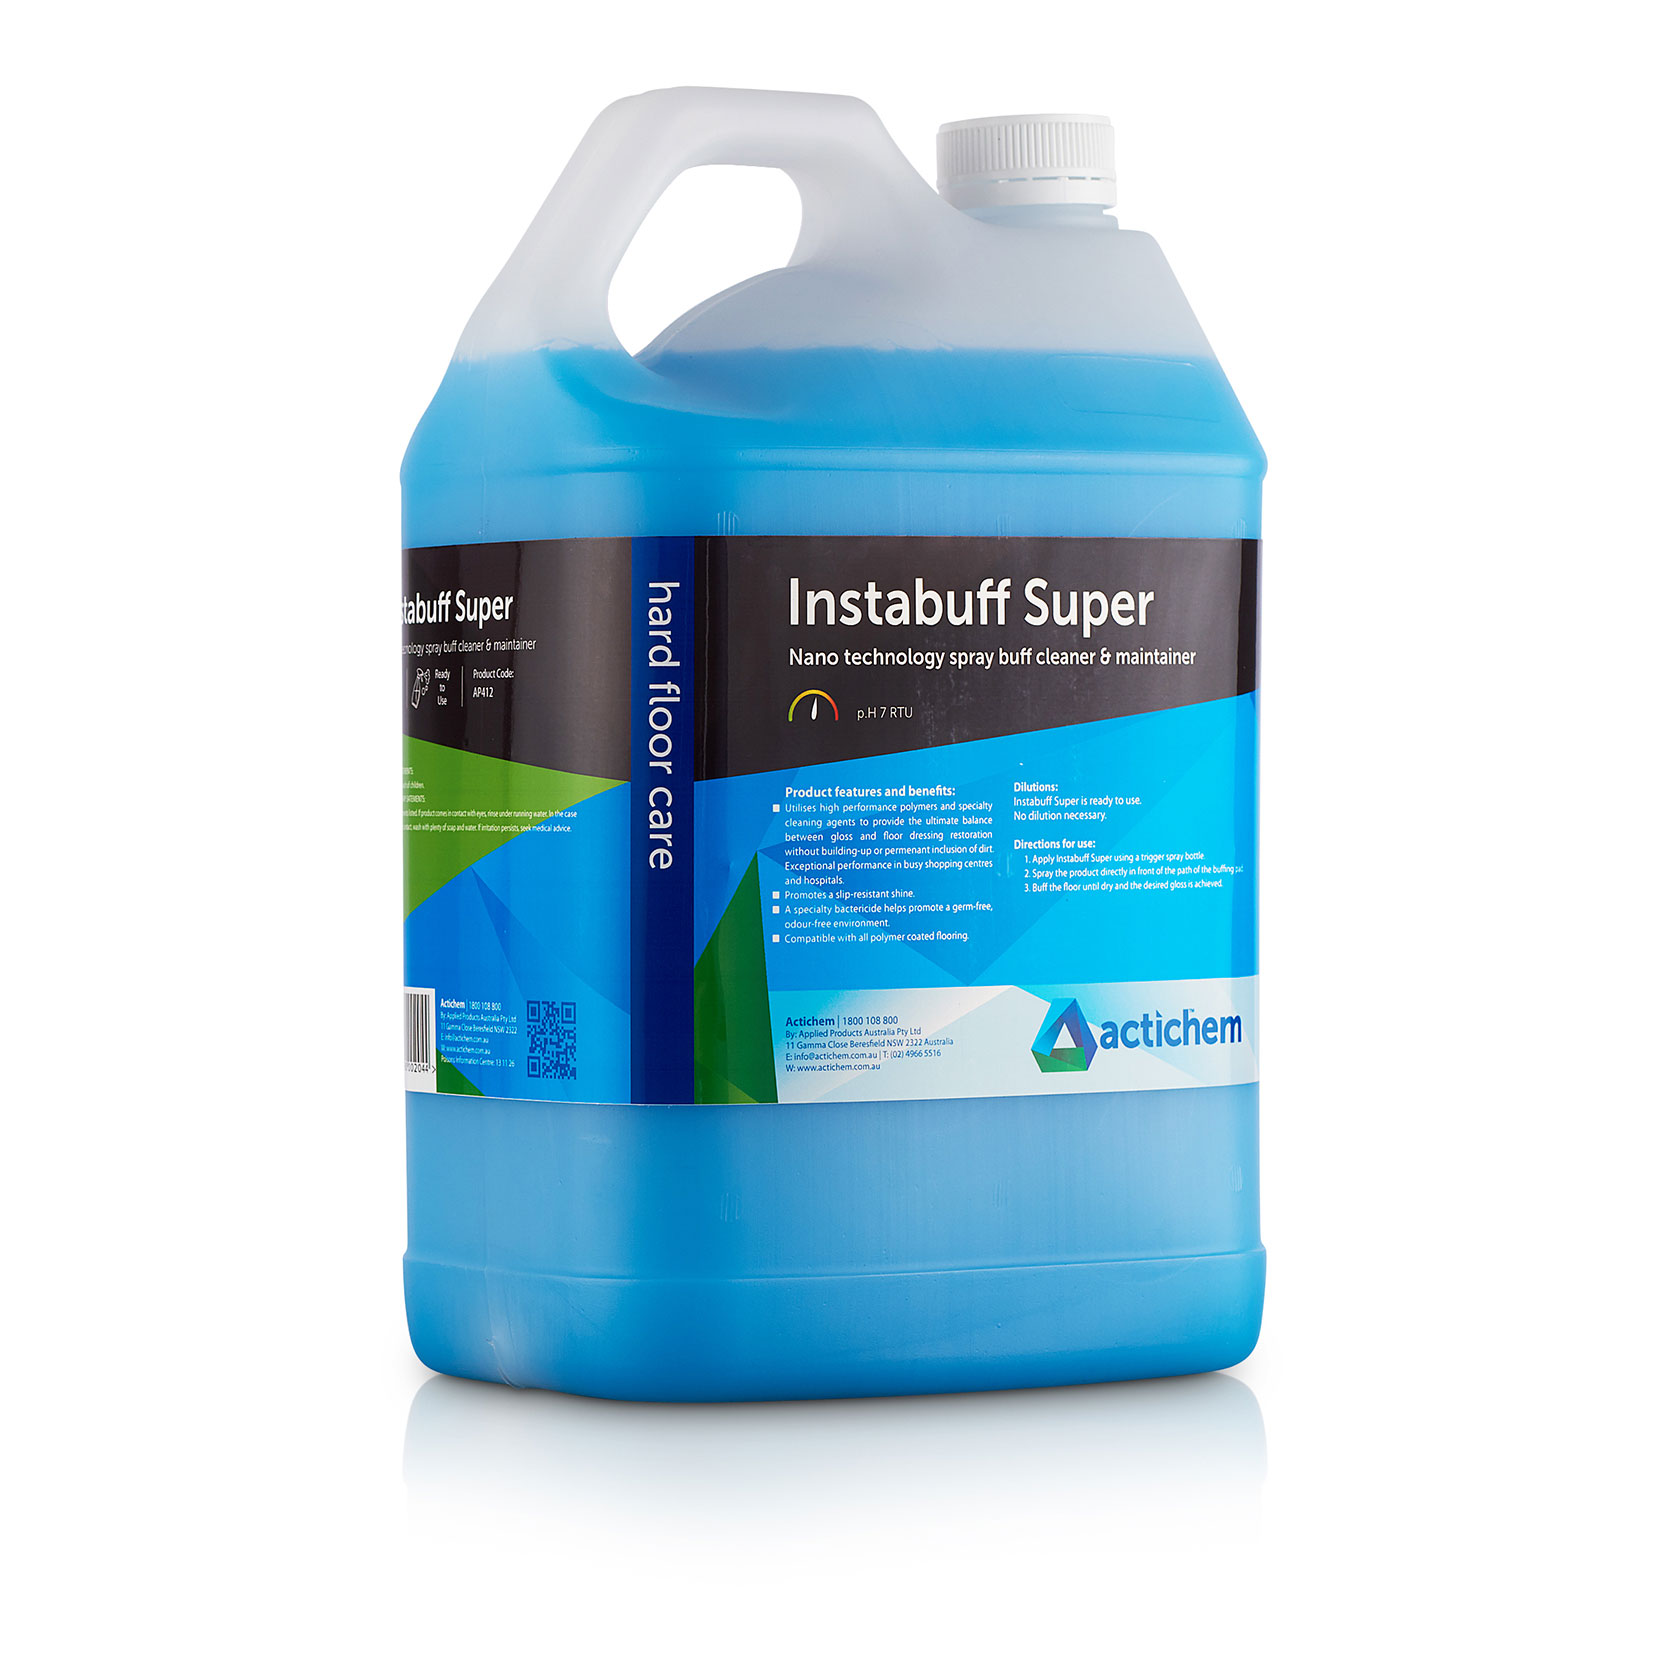 Actichem Instabuff Polished floor cleaner and maintainer